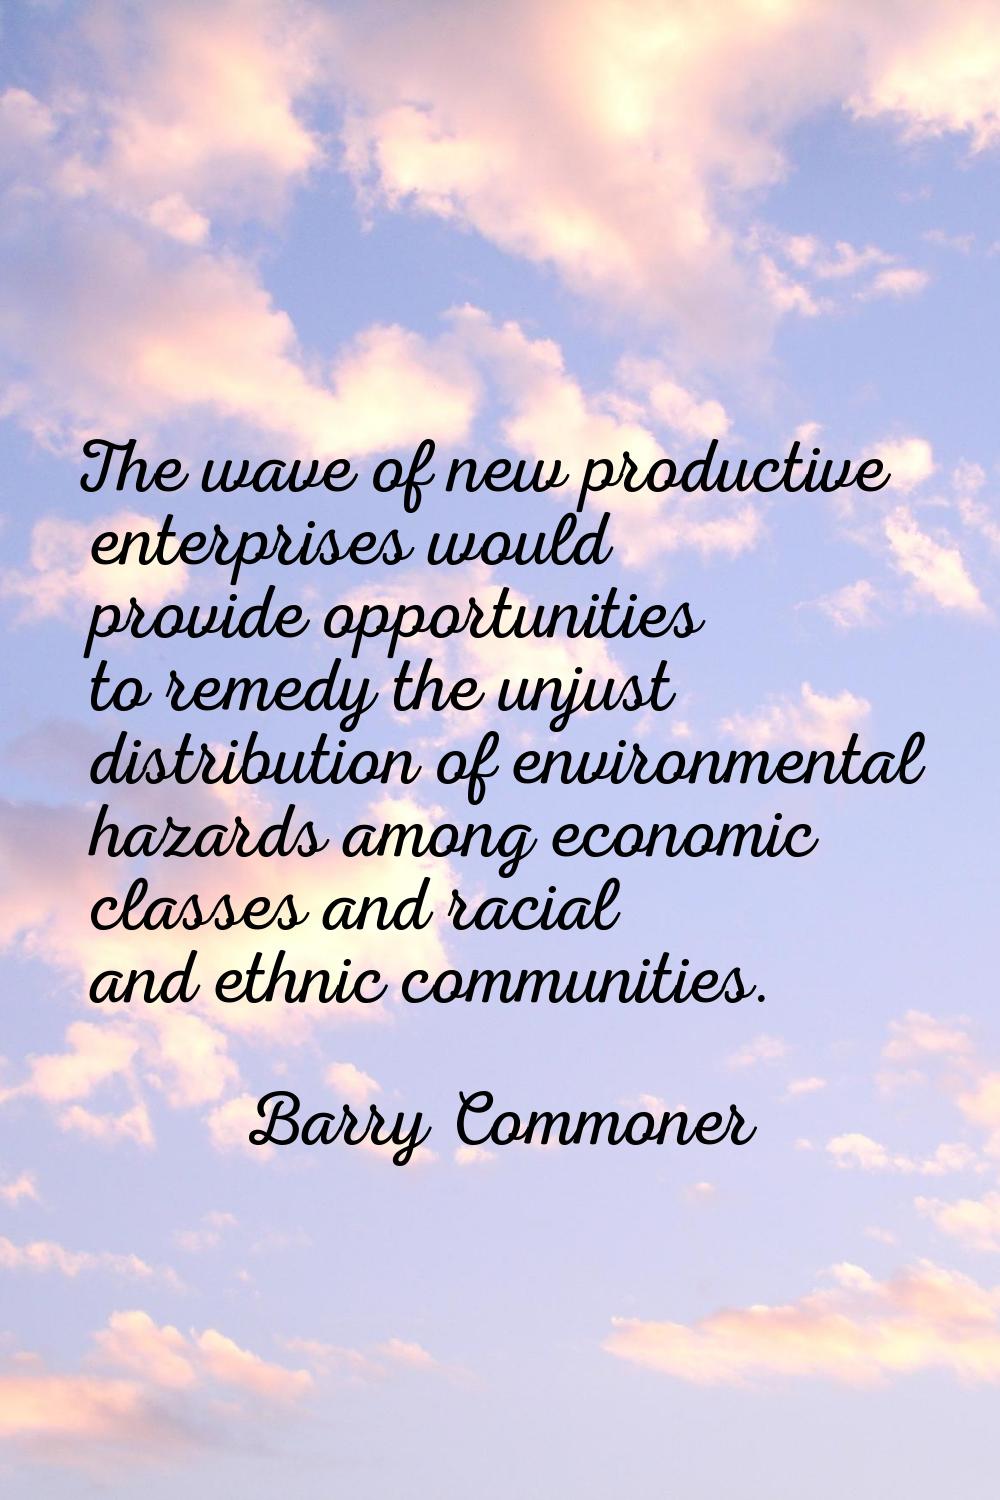 The wave of new productive enterprises would provide opportunities to remedy the unjust distributio